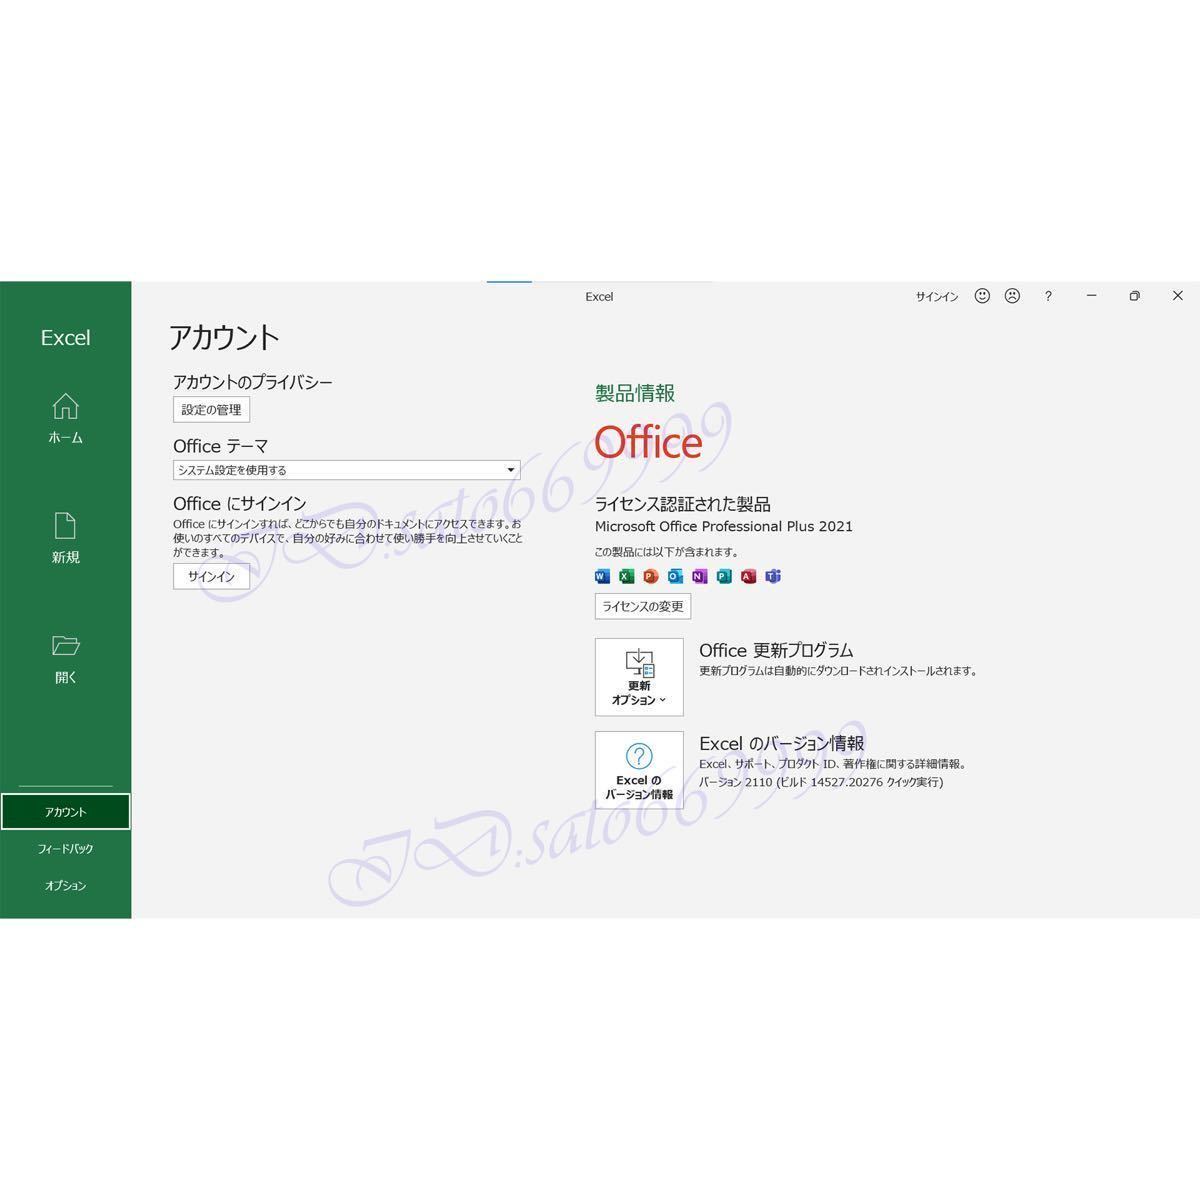 Microsoft Office 2021 Professional Plus. year regular goods Pro duct key * Access Word Excel PowerPoint certification guarantee Japanese procedure document fire 